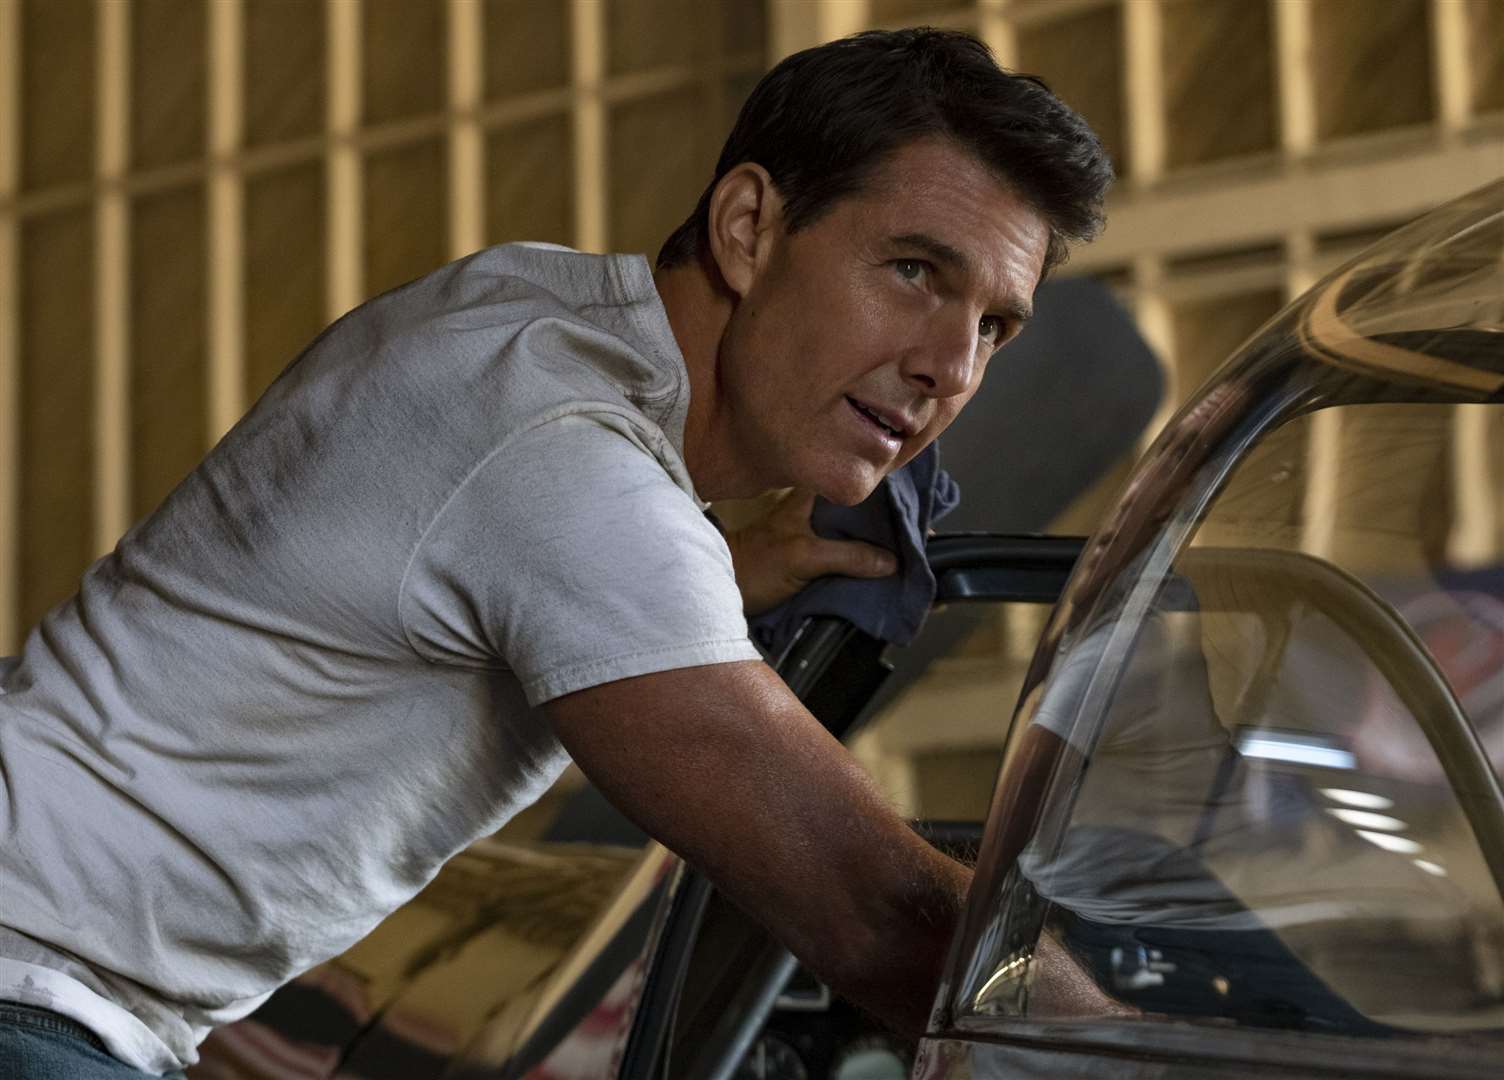 Tom Cruise as Captain Pete "Maverick" Mitchell has some difficult decisions to make. Picture: PA Photo/Paramount Pictures/Scott Garfield